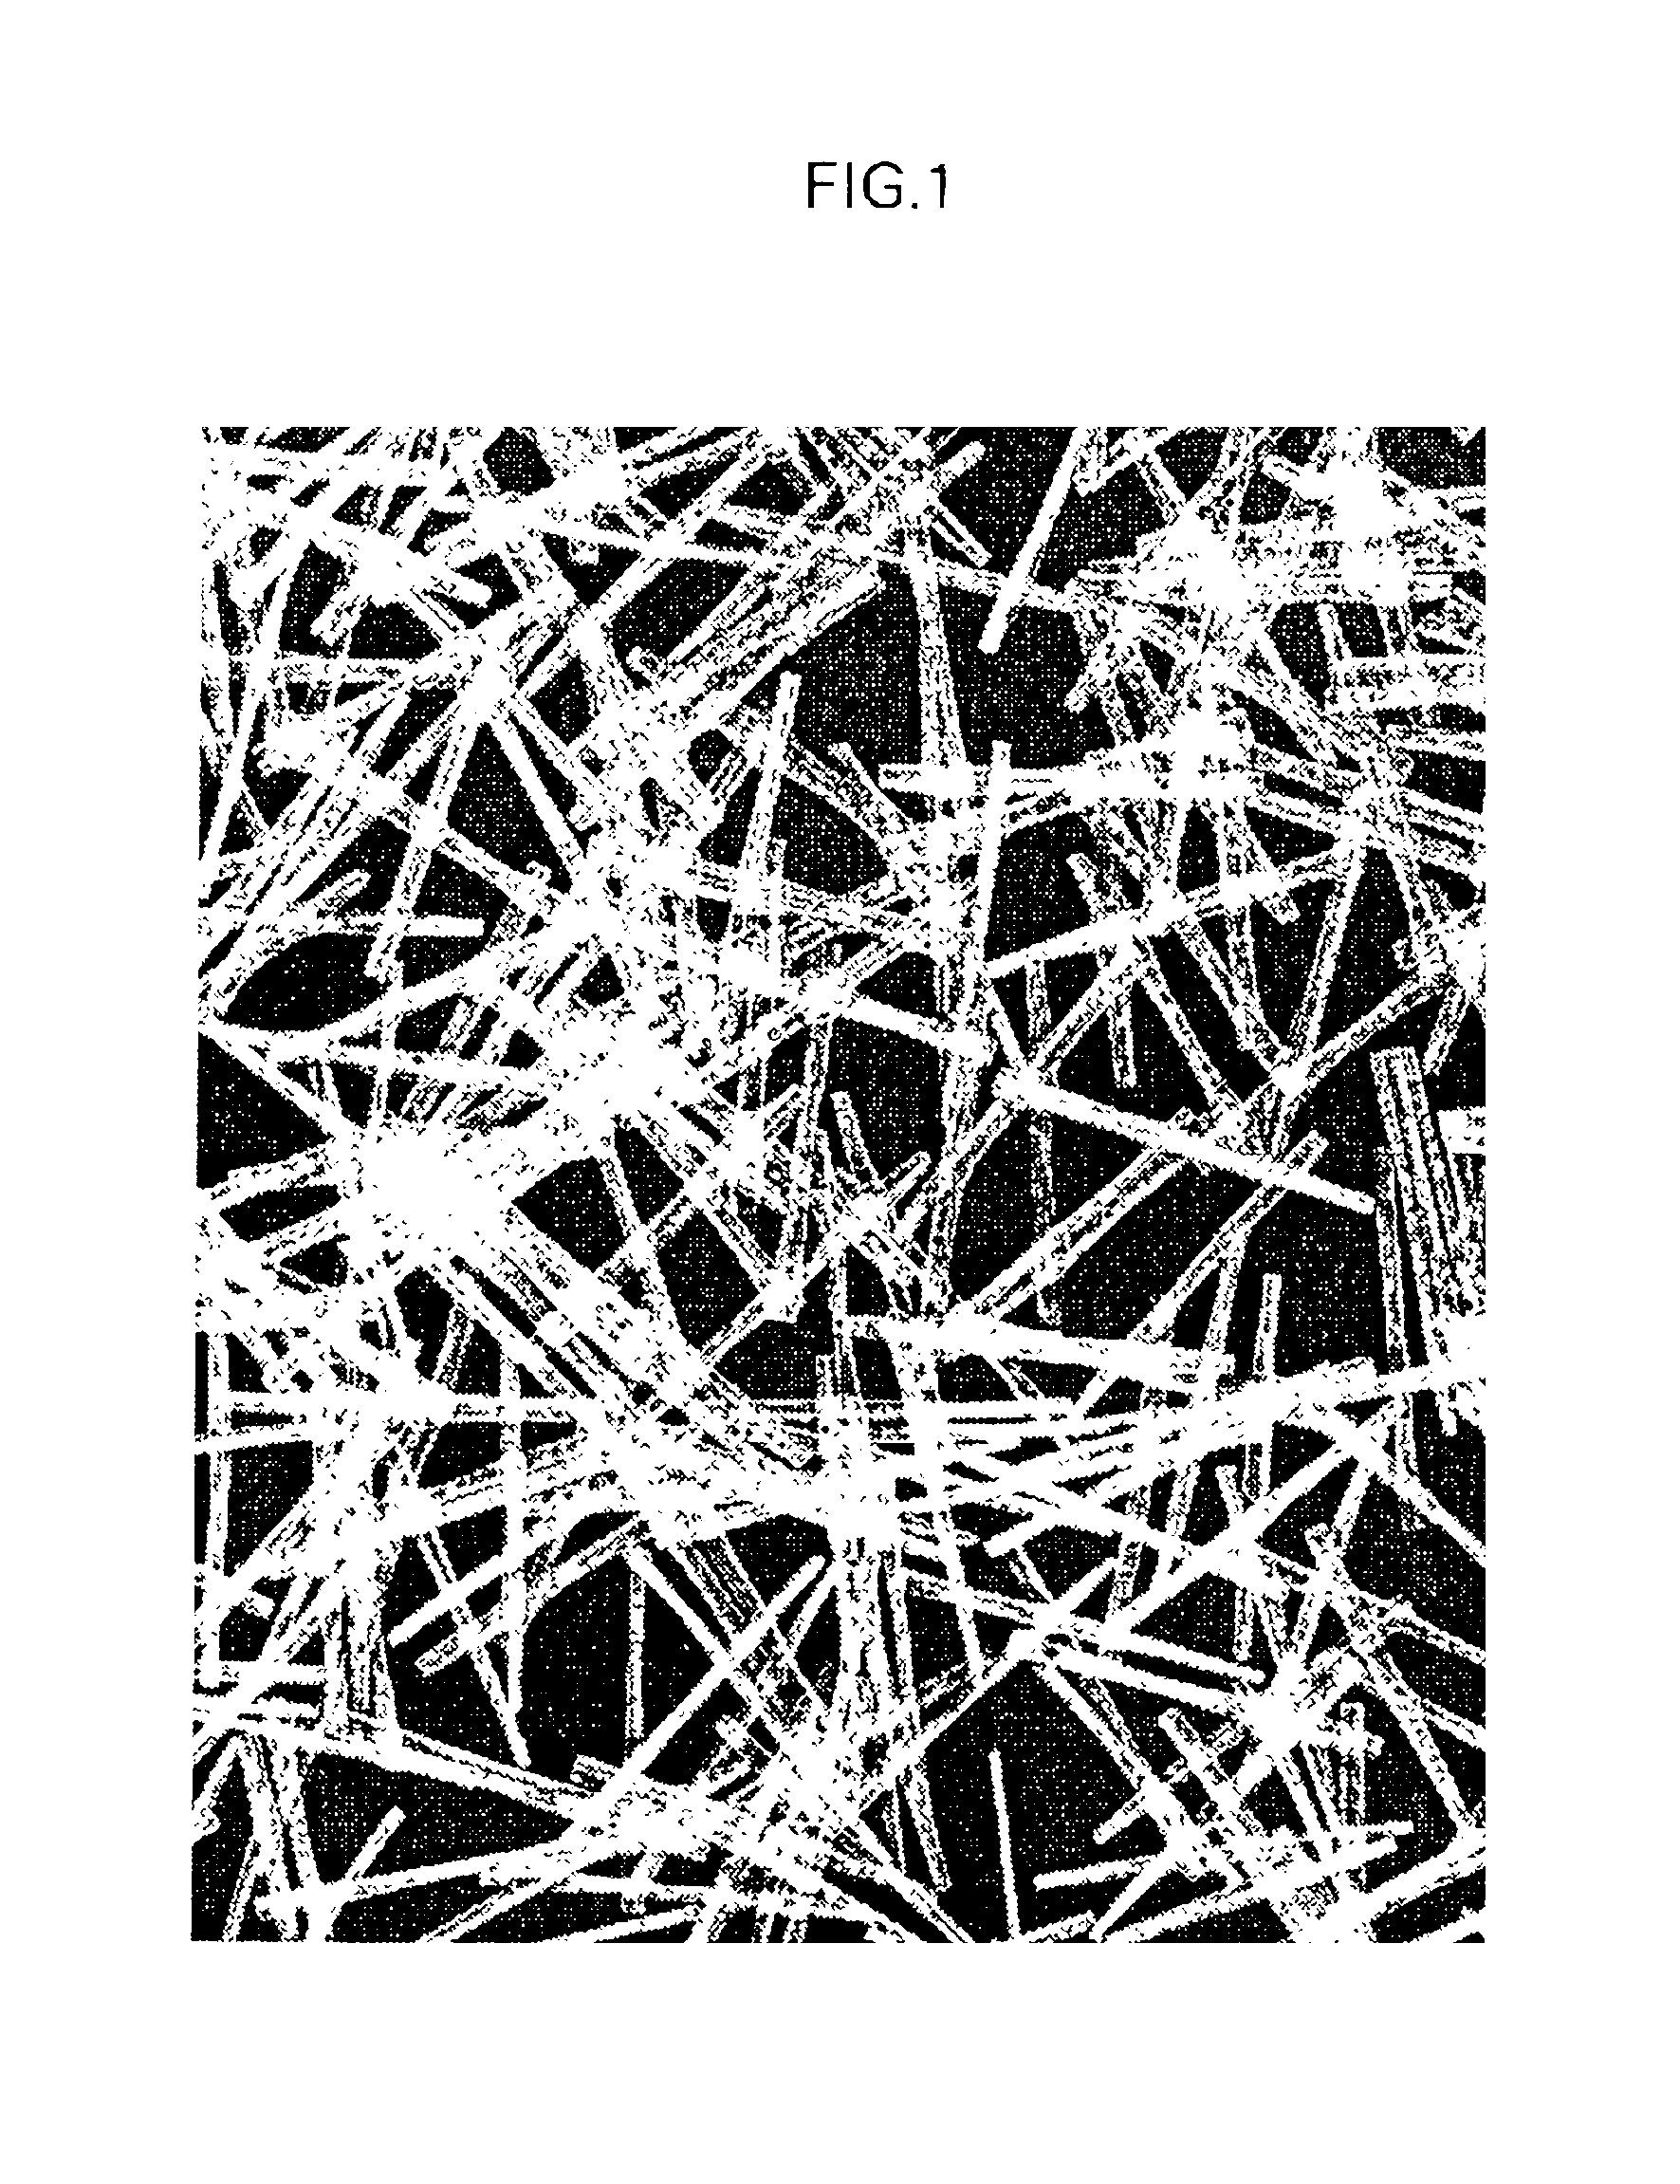 Long-fiber-reinforced thermoplastice resin sheets, production process thereof, and composite structures reinforced by the sheets